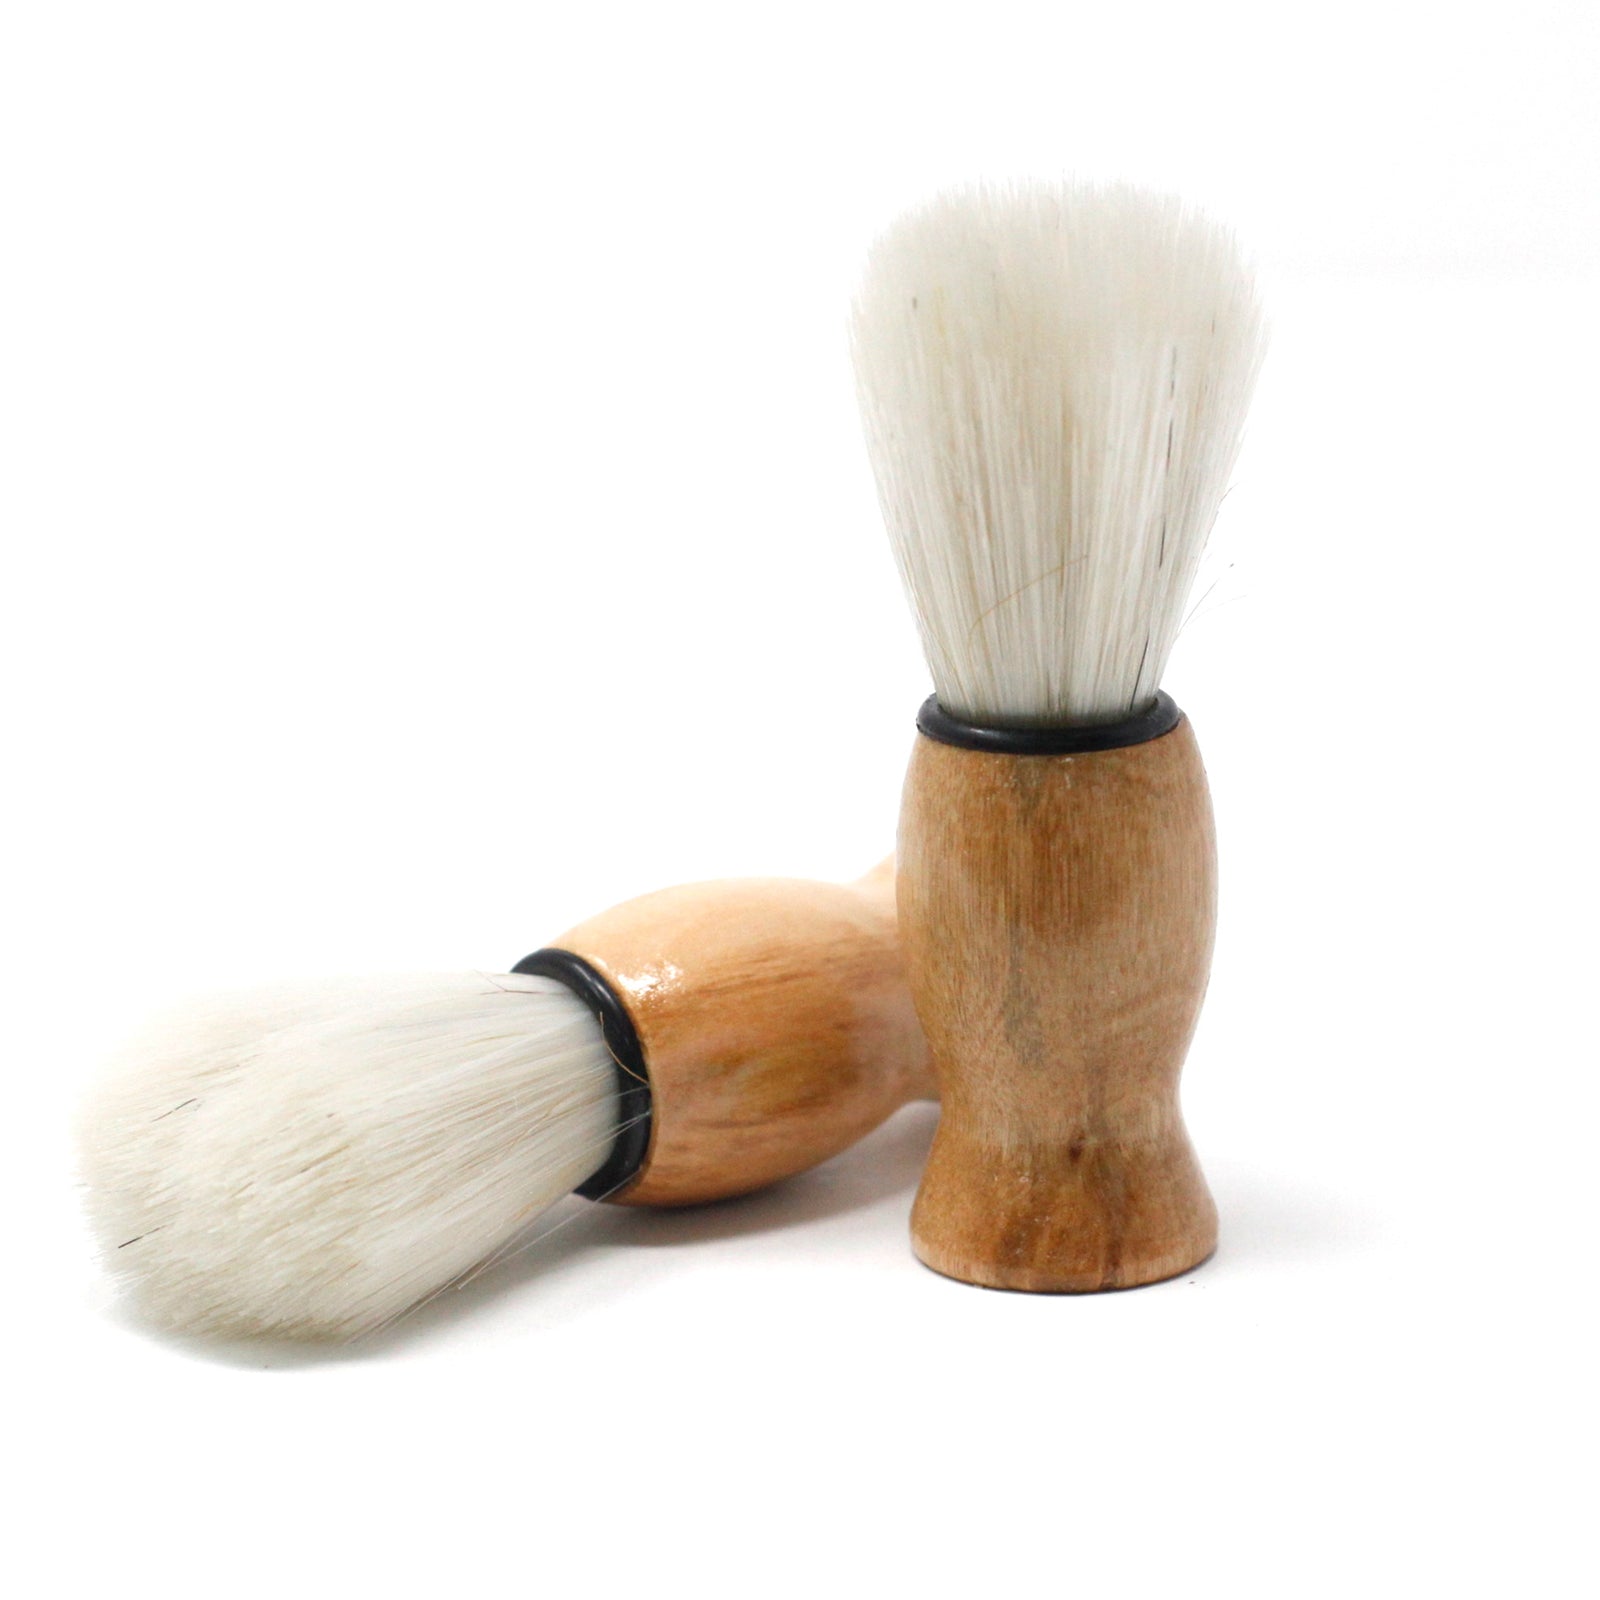 View Old Fashioned Shaving Brush information